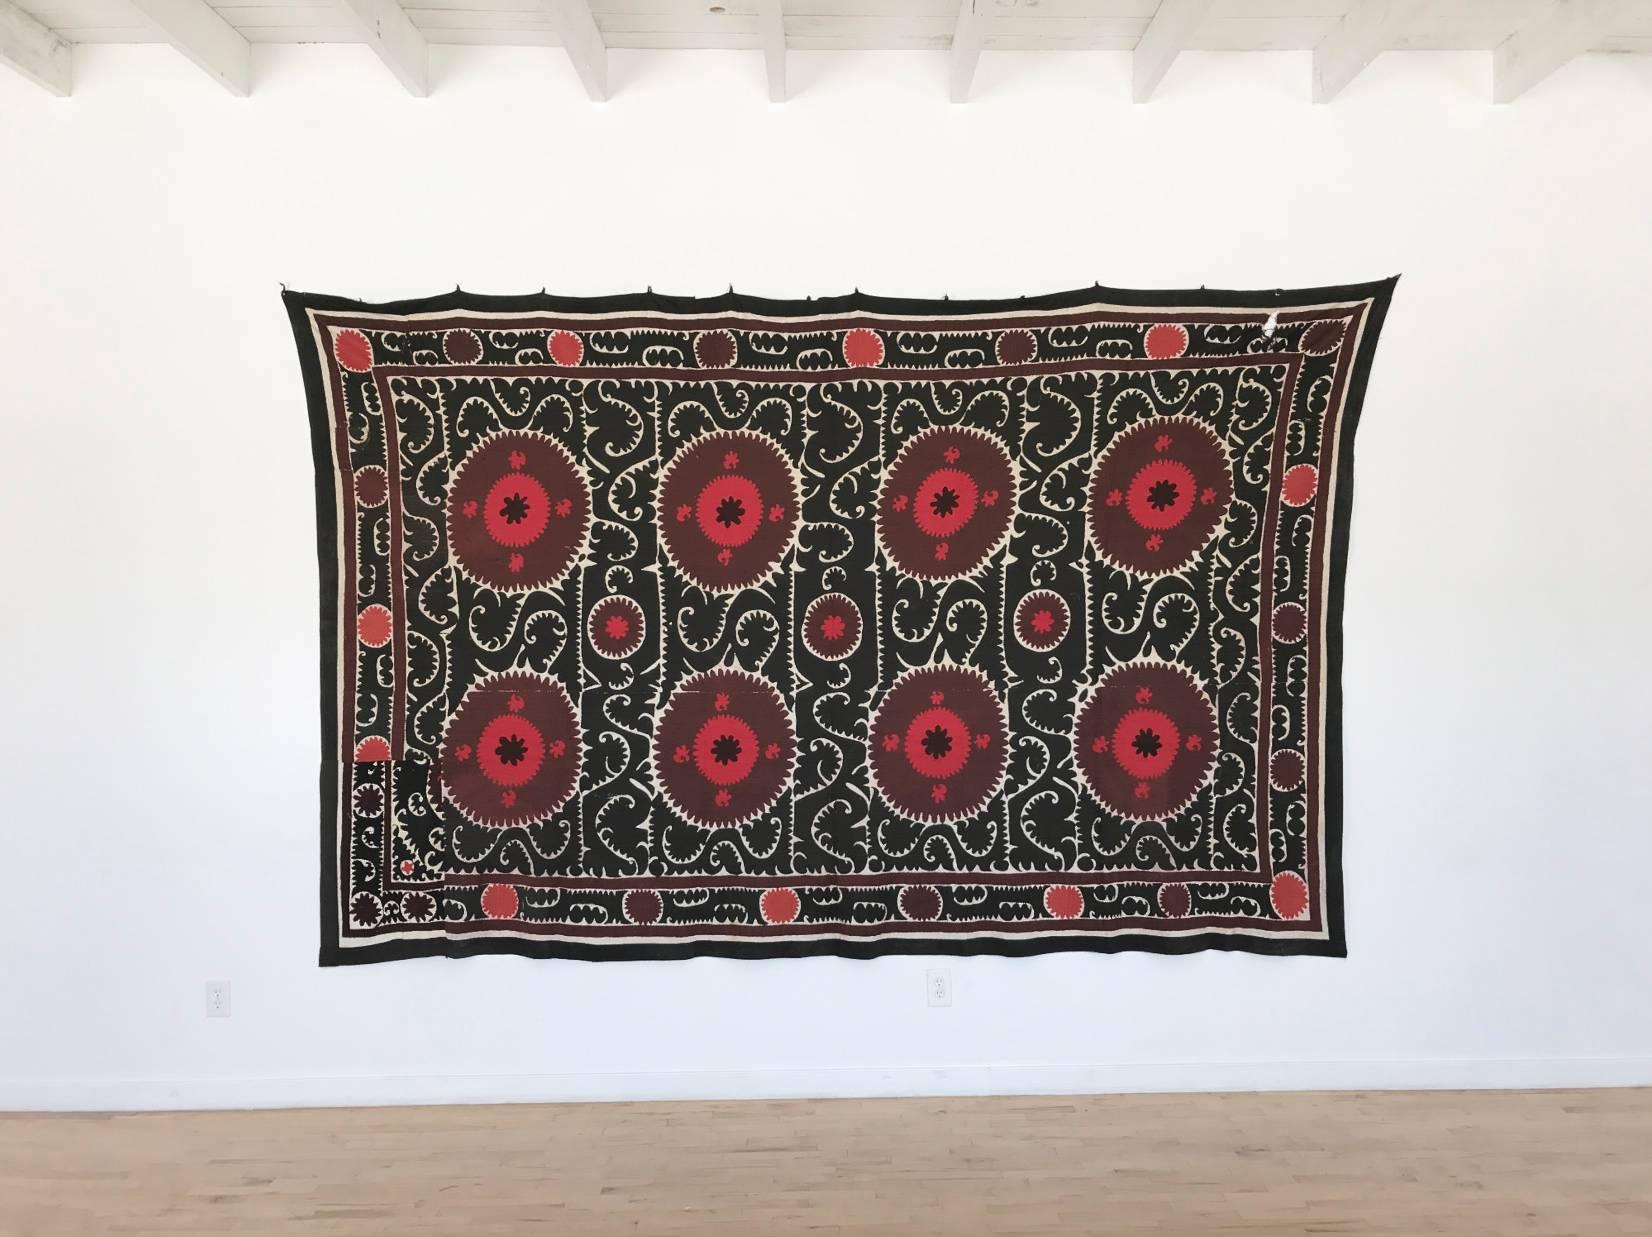 Intricate hand-embroidered needlework Uzbek Suzani with black background and red, maroon/brown and white geometric and paisley motifs throughout. Linen and cotton with silk threading. Very large size can act as a bold wall hanging, bedspread or sofa